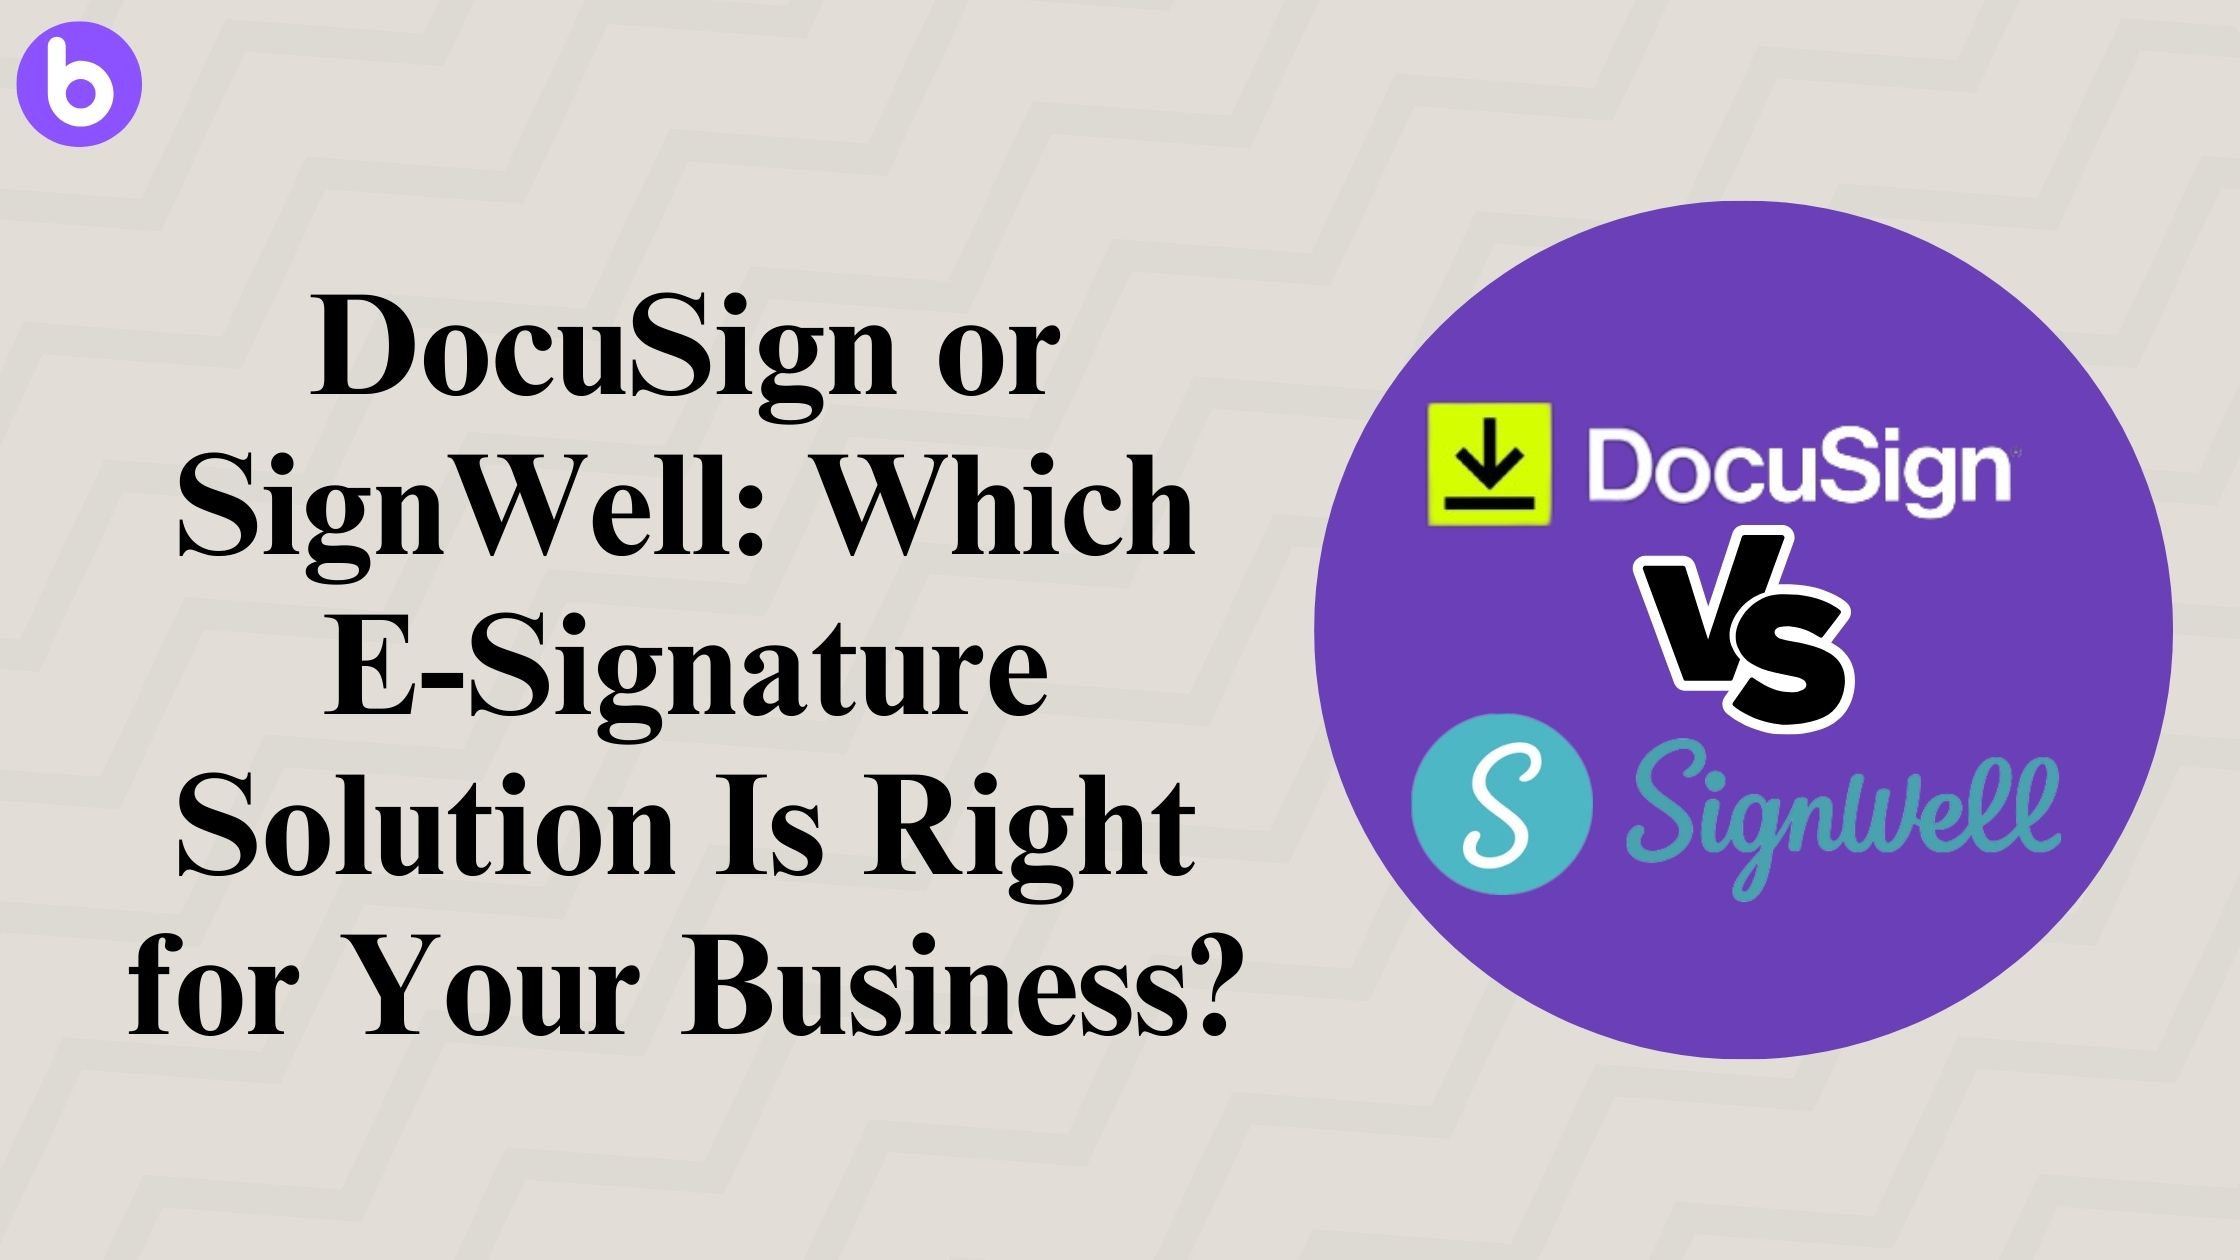 DocuSign or SignWell: Which E-Signature Solution Is Right for Your Business?